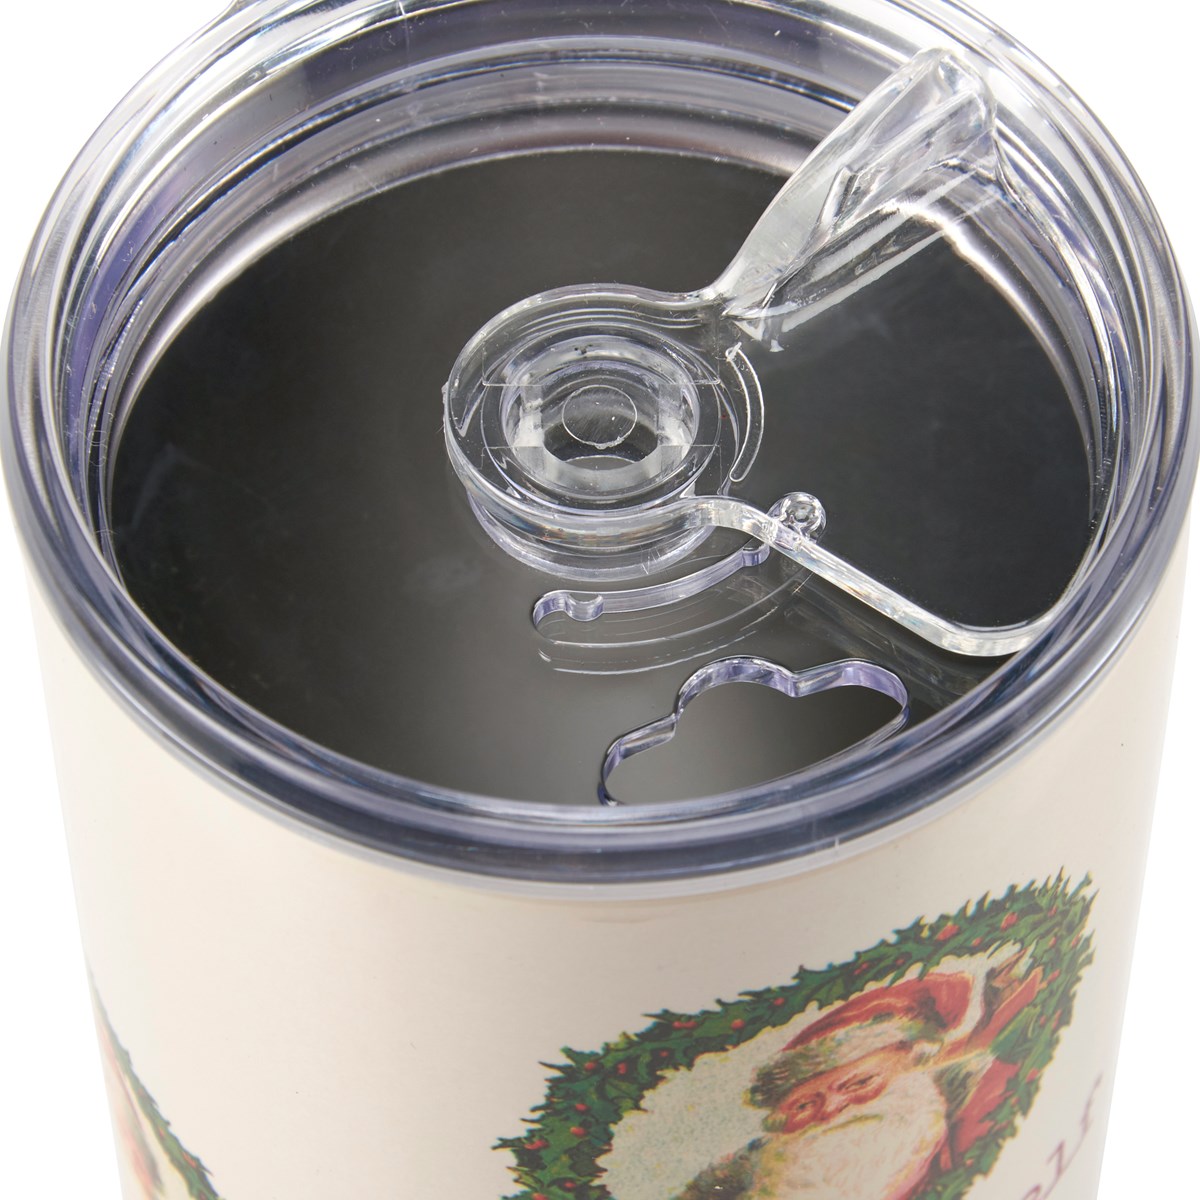 Merry Little Coffee Tumbler - Stainless Steel, Plastic